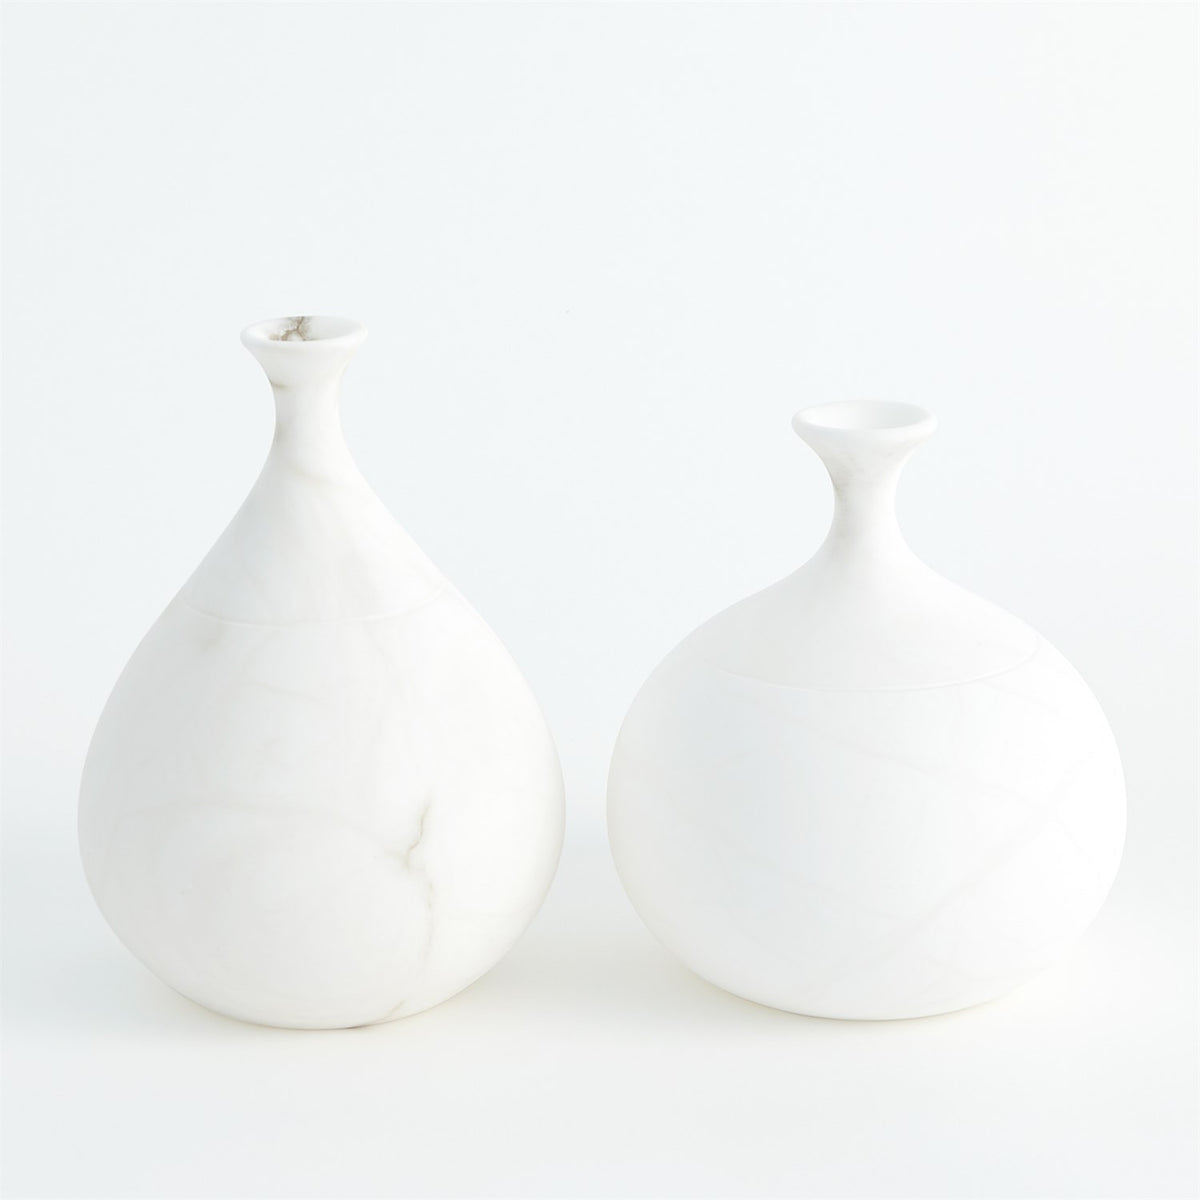 Two styles of white alabaster teardrop vases